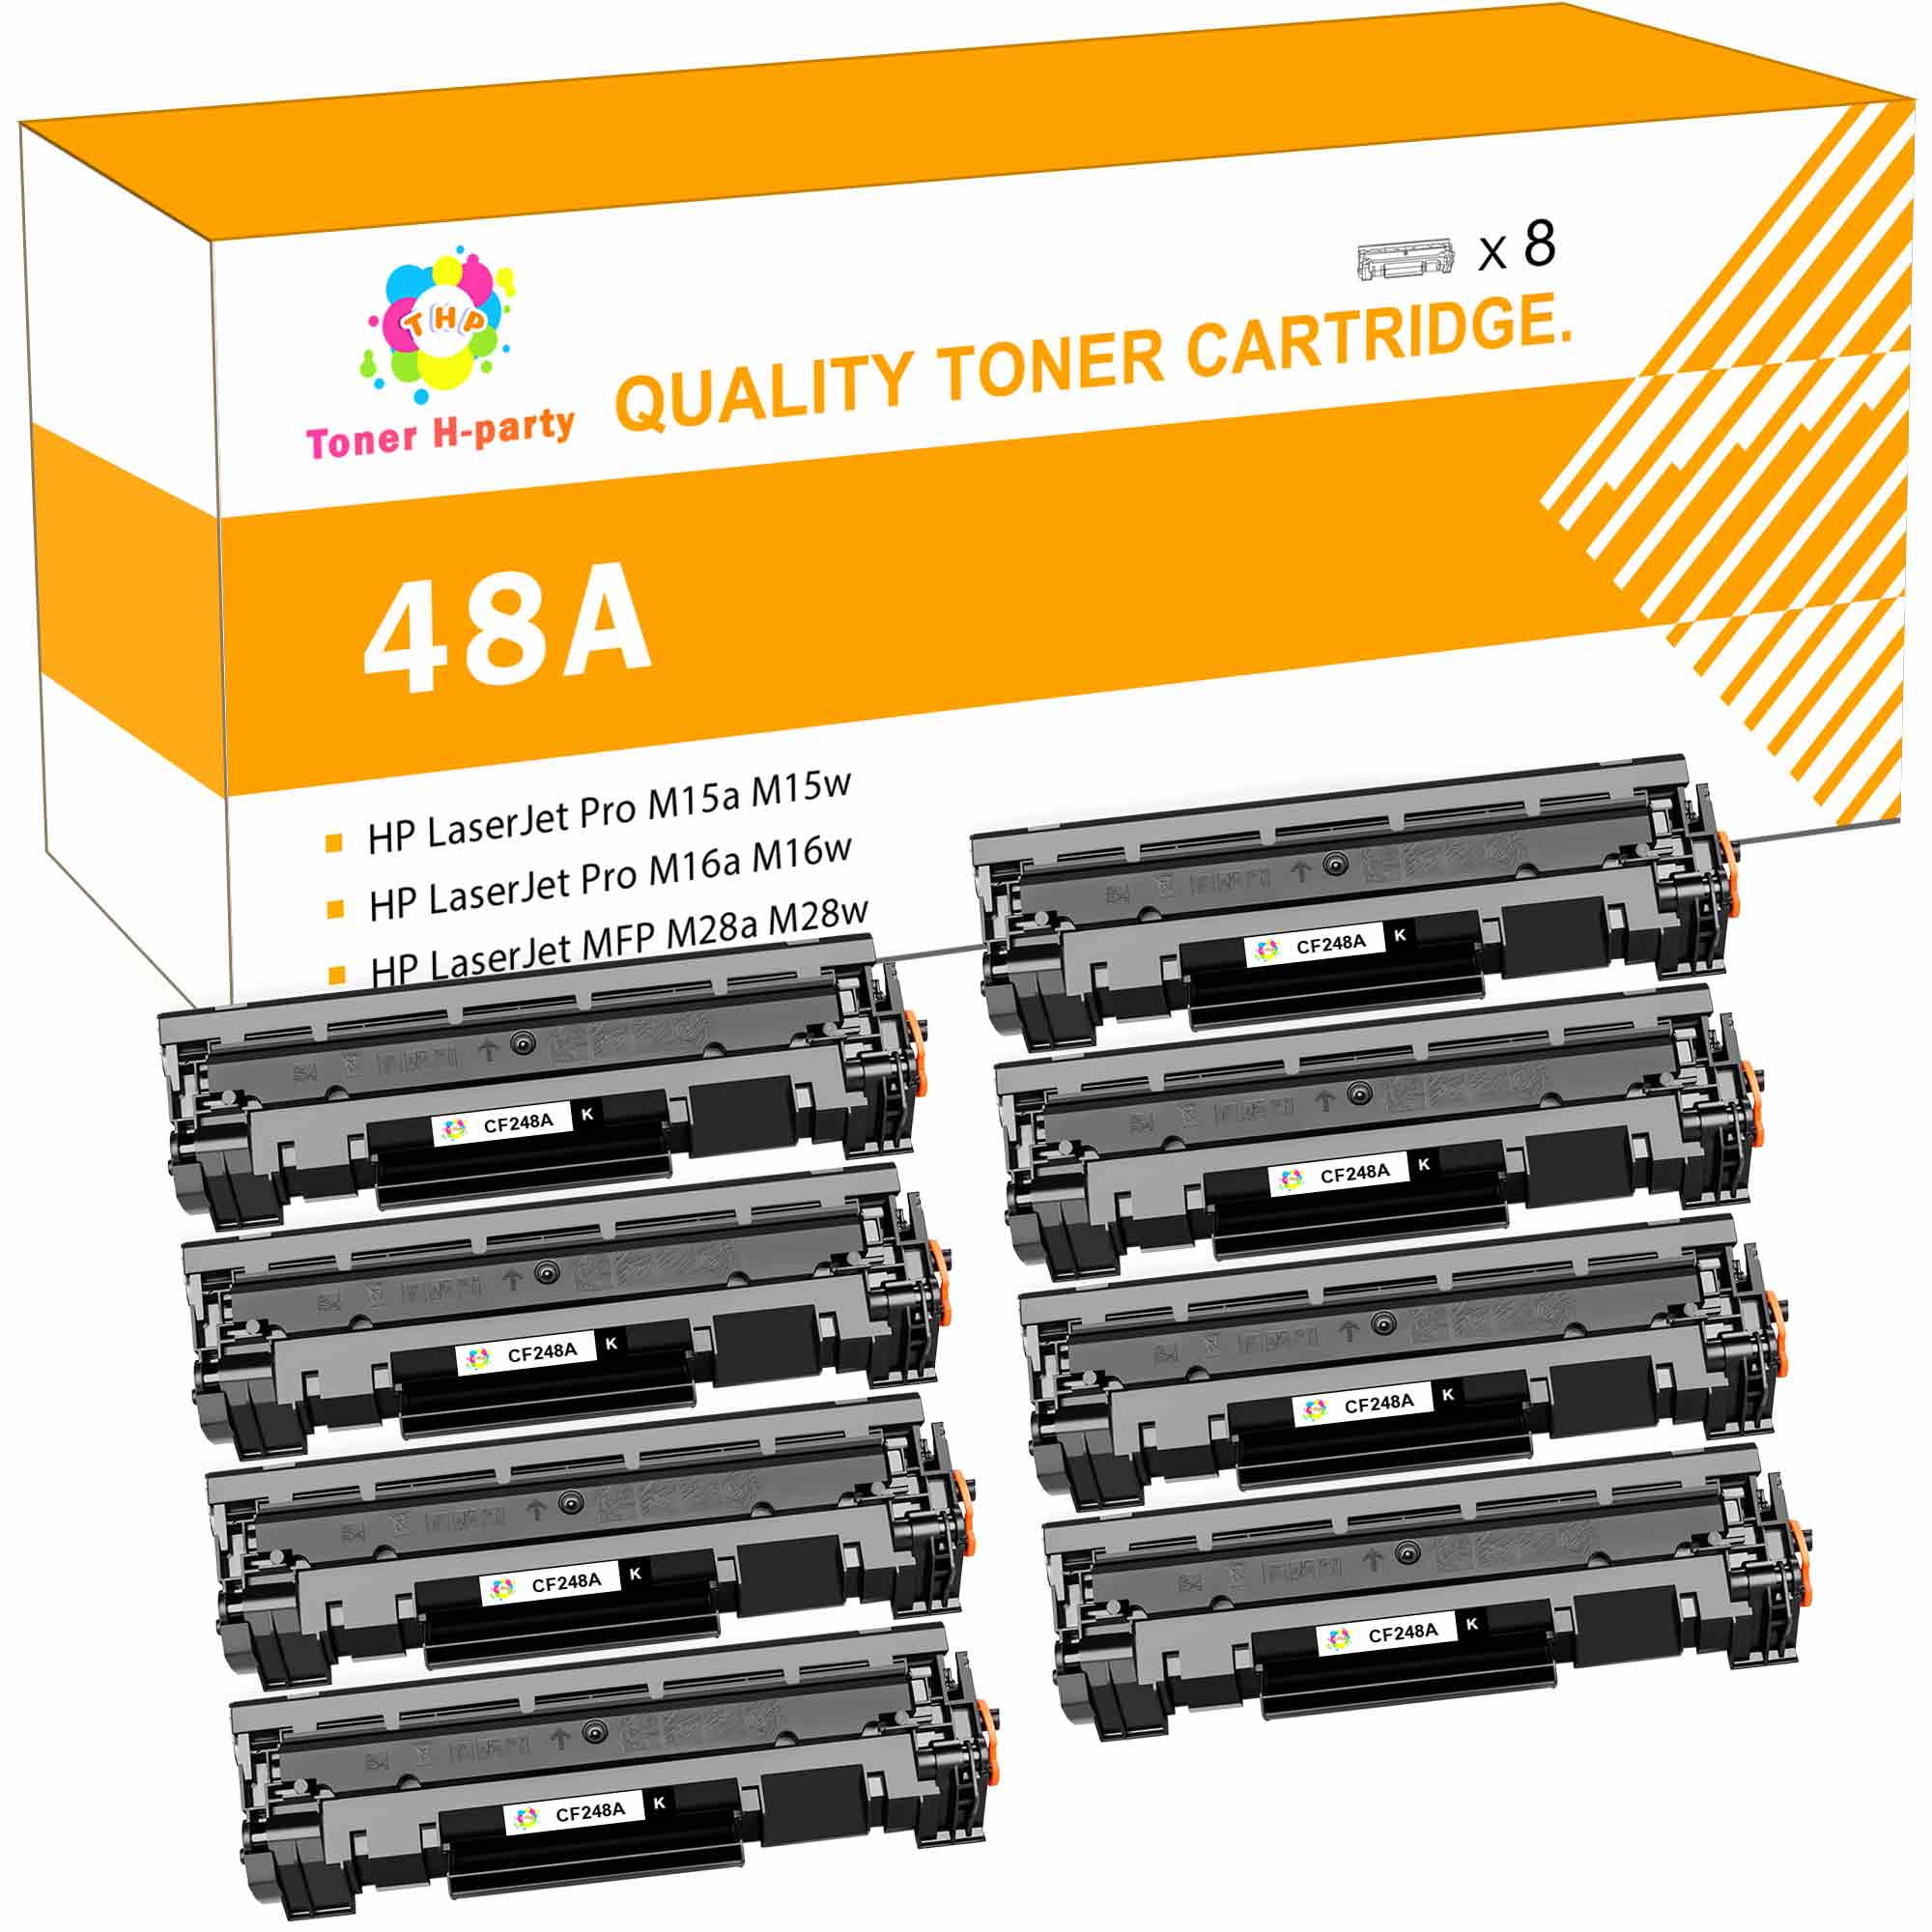 resident spin Awaken Toner H-Party 8-Pack Compatible Toner Cartridge for HP 48A CF248A for HP  Laserjet Pro MFP M28a M30w M31w M29a M16a M16w M15w M29w M28w M15a M28 M31  M15 M14 M17 Laser Toner